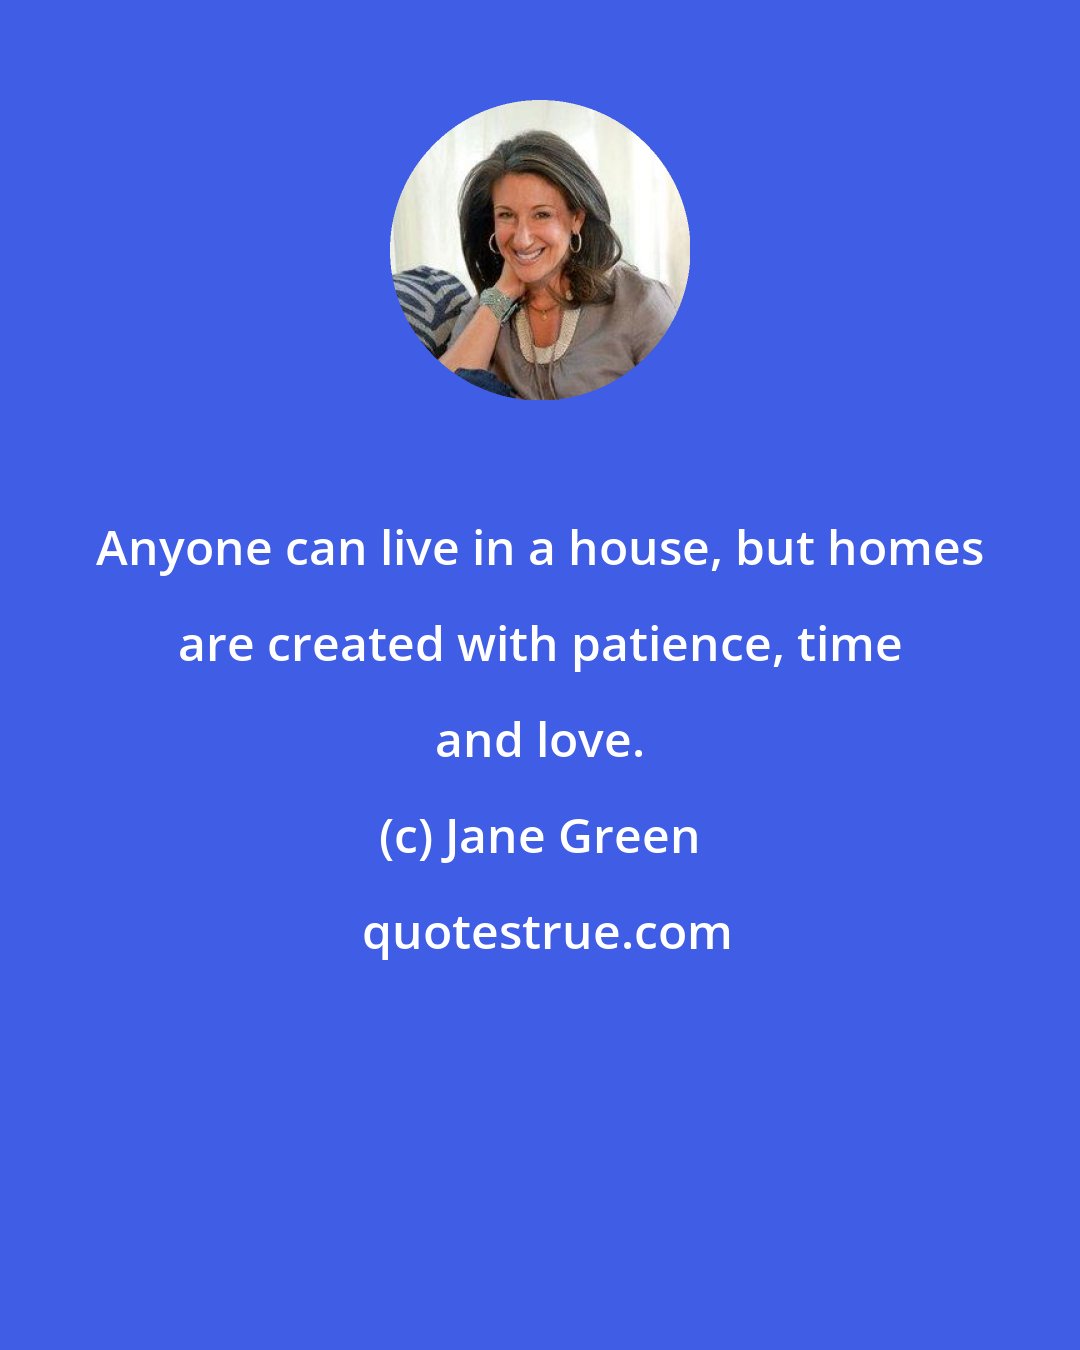 Jane Green: Anyone can live in a house, but homes are created with patience, time and love.